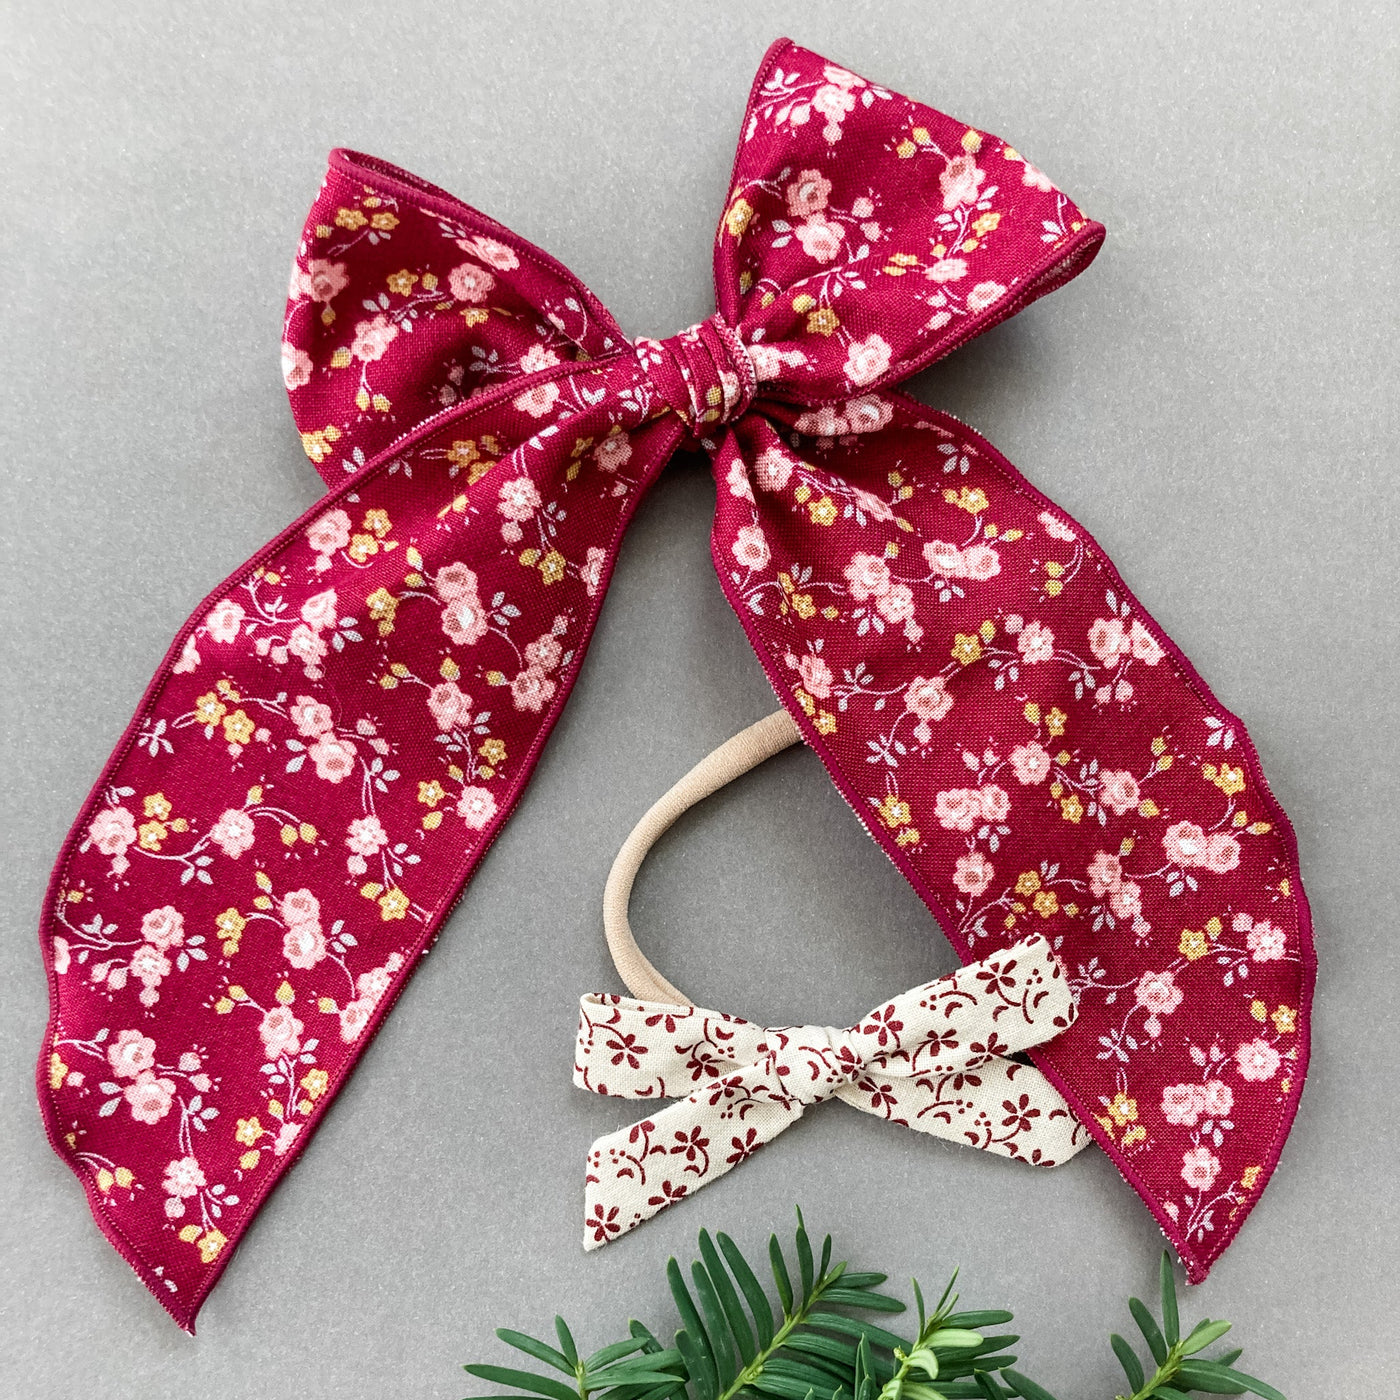 Holiday 2021 hair bow collection with burgundy and ivory floral hair bows